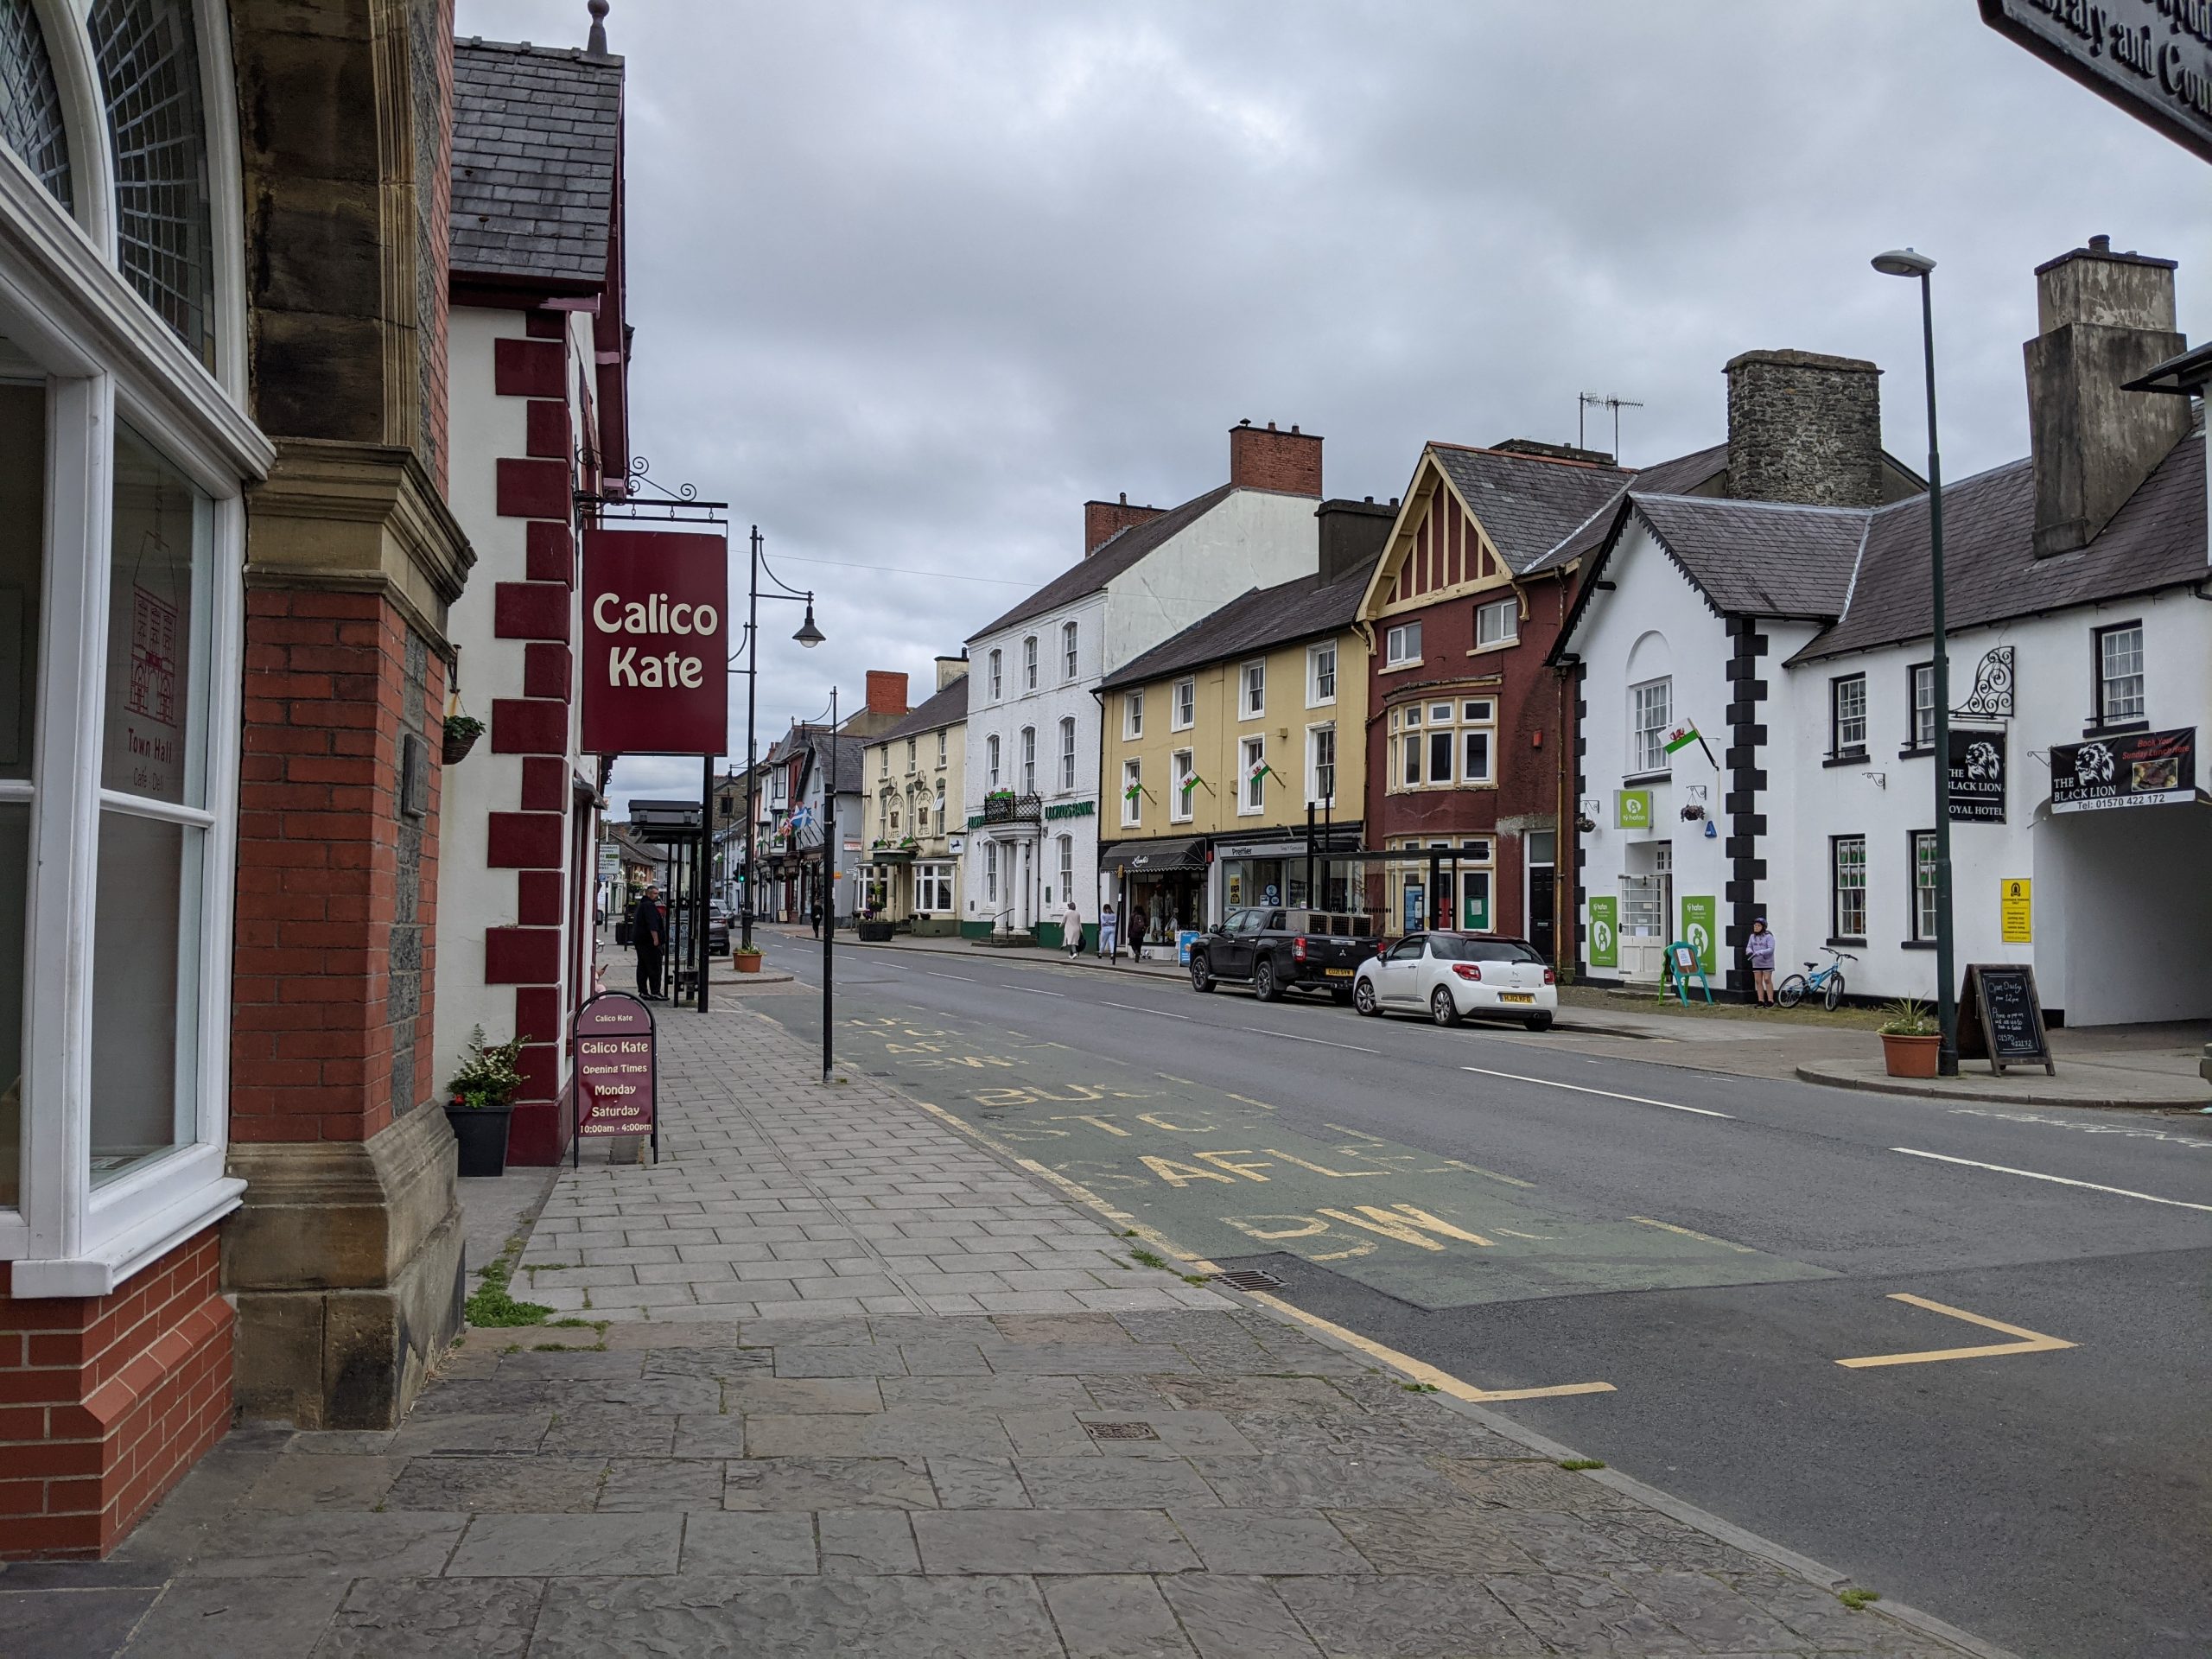 Street in town centre lined with colourful historic houses and shops